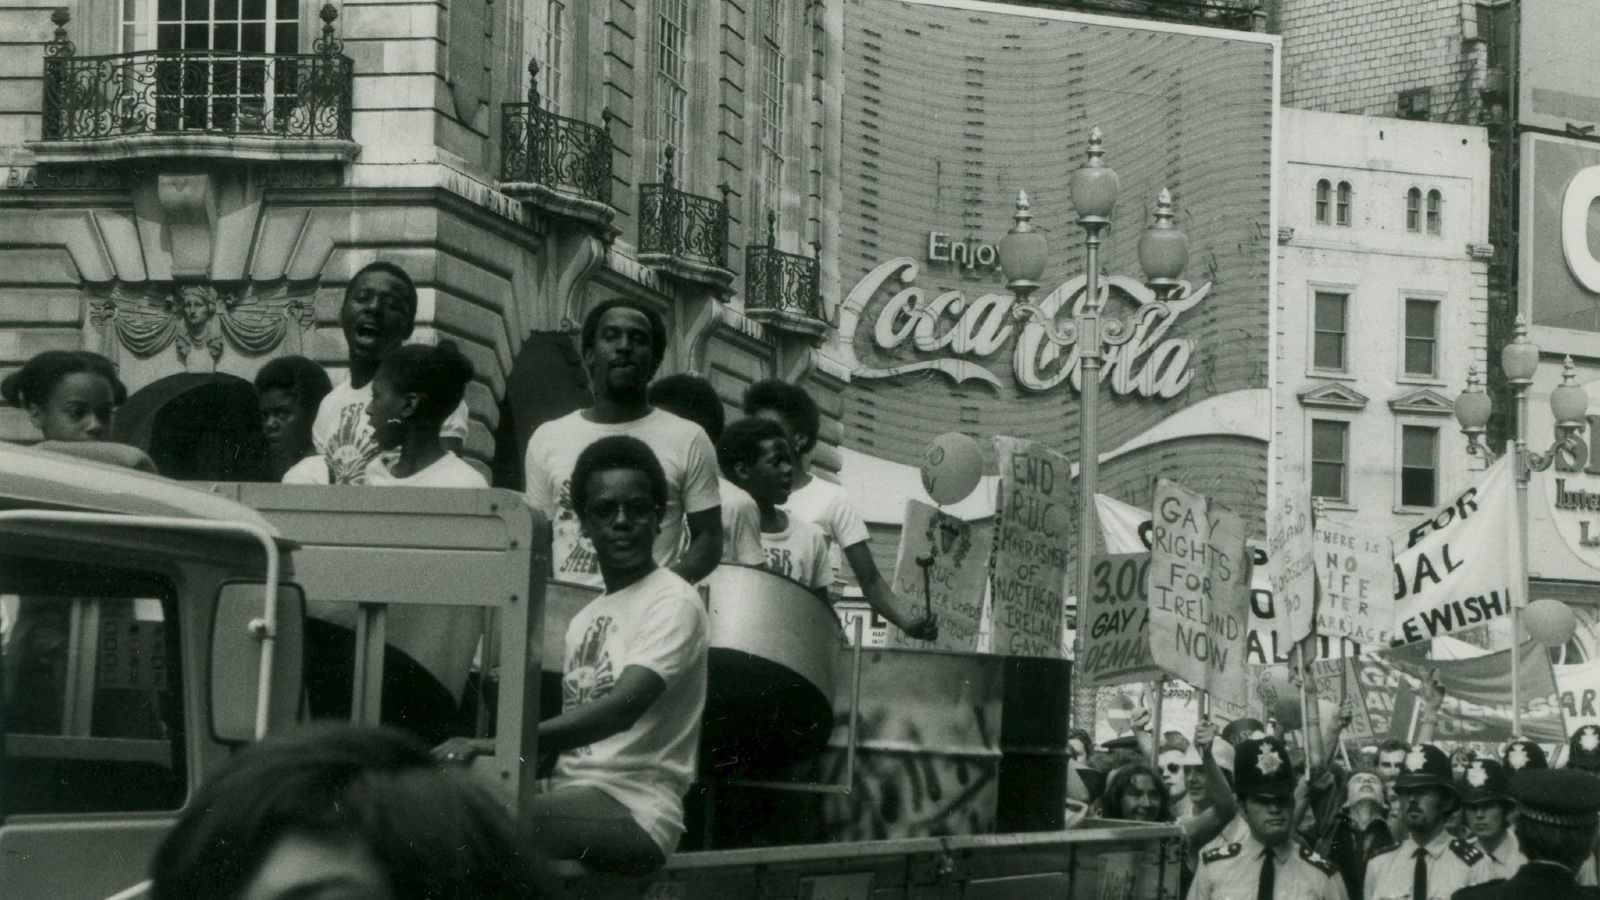 A Gay Pride procession including a group of people in a automobile and others following with placards and signs. Location appears to be Piccadilly Circus in London. There is a huge Coca-Cola sign in the background.